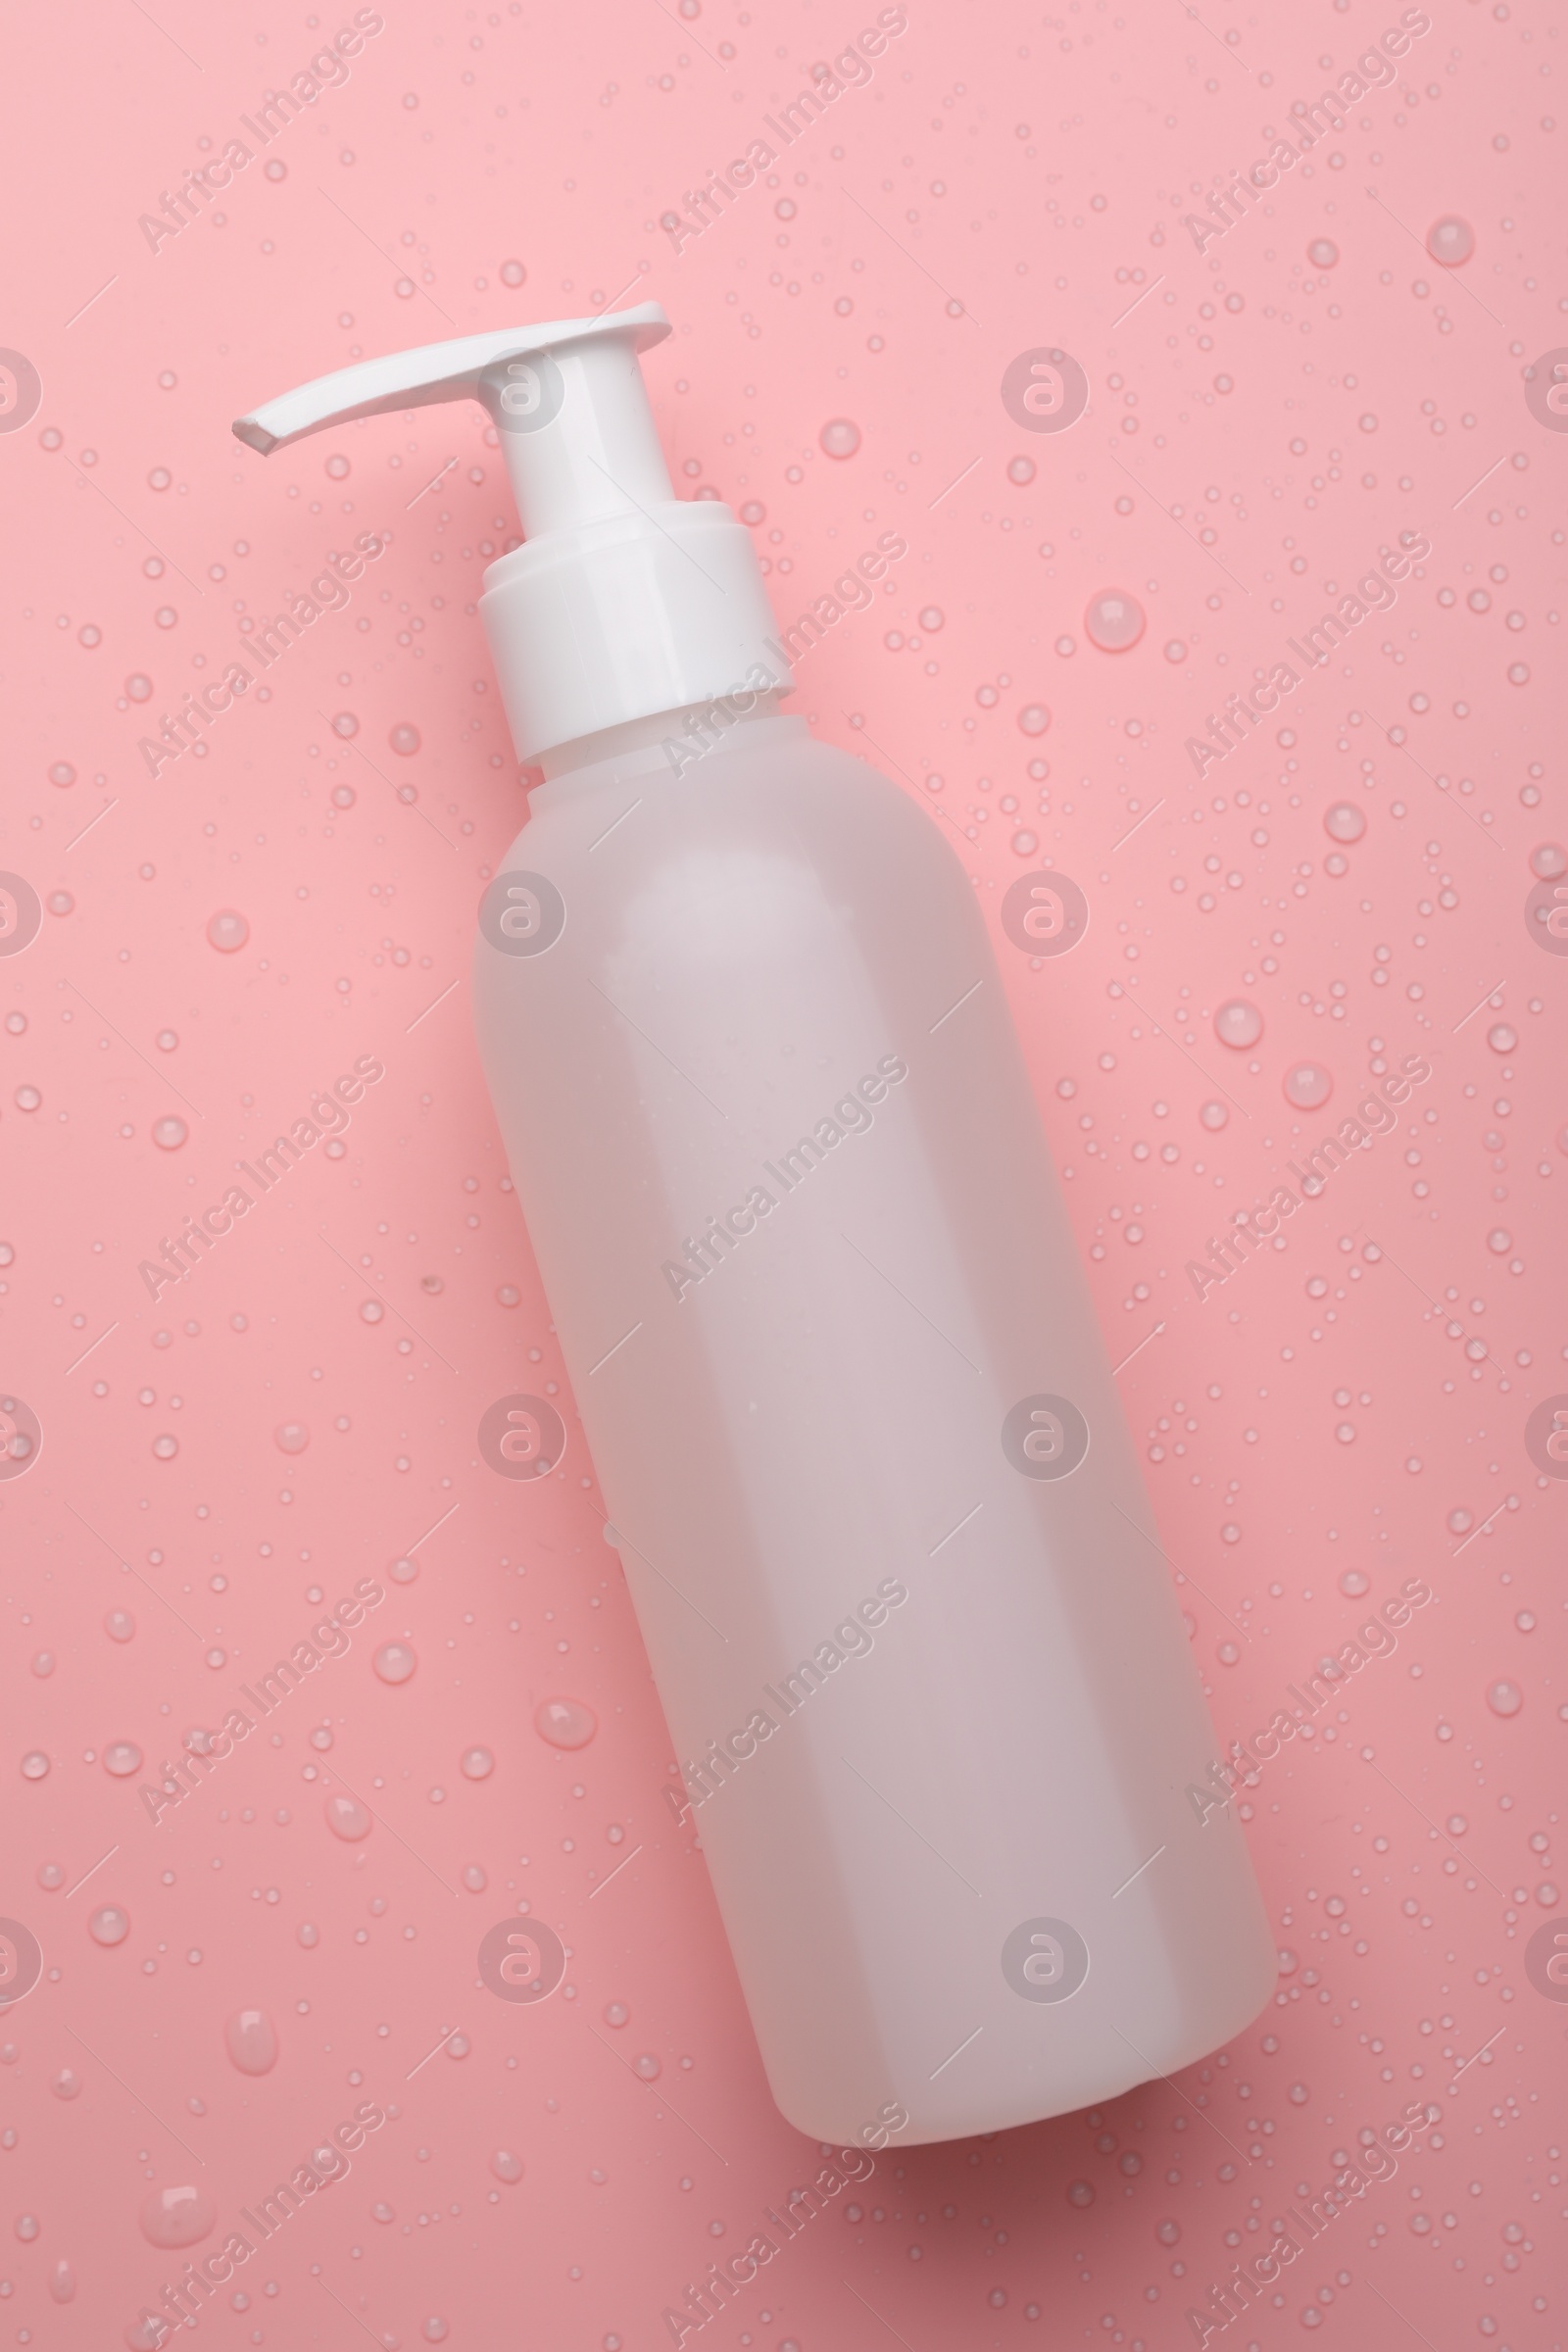 Photo of Wet bottle of face cleansing product on pink background, top view